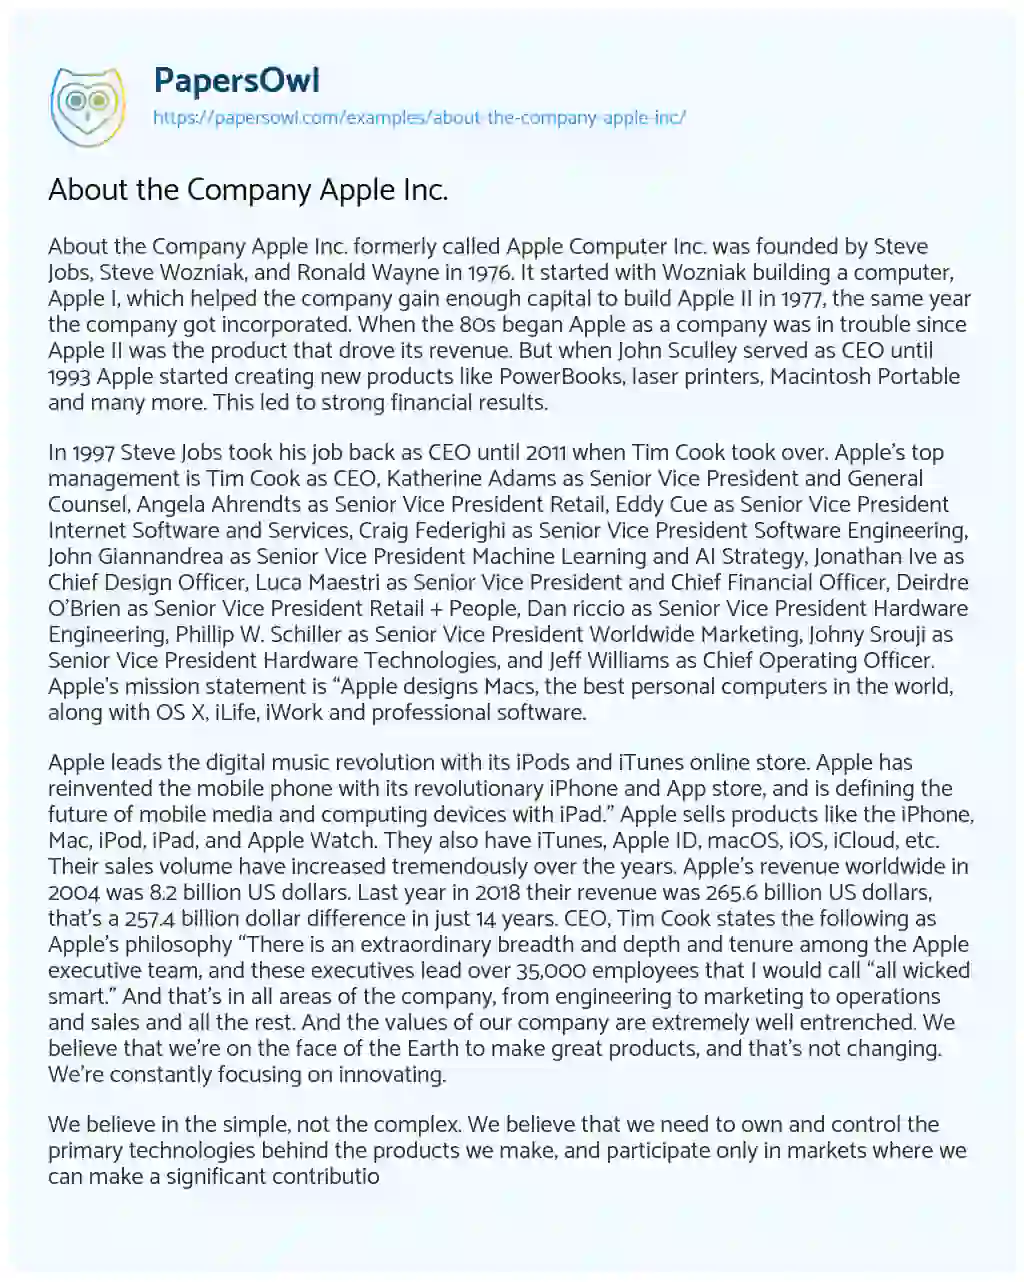 Essay on About the Company Apple Inc.